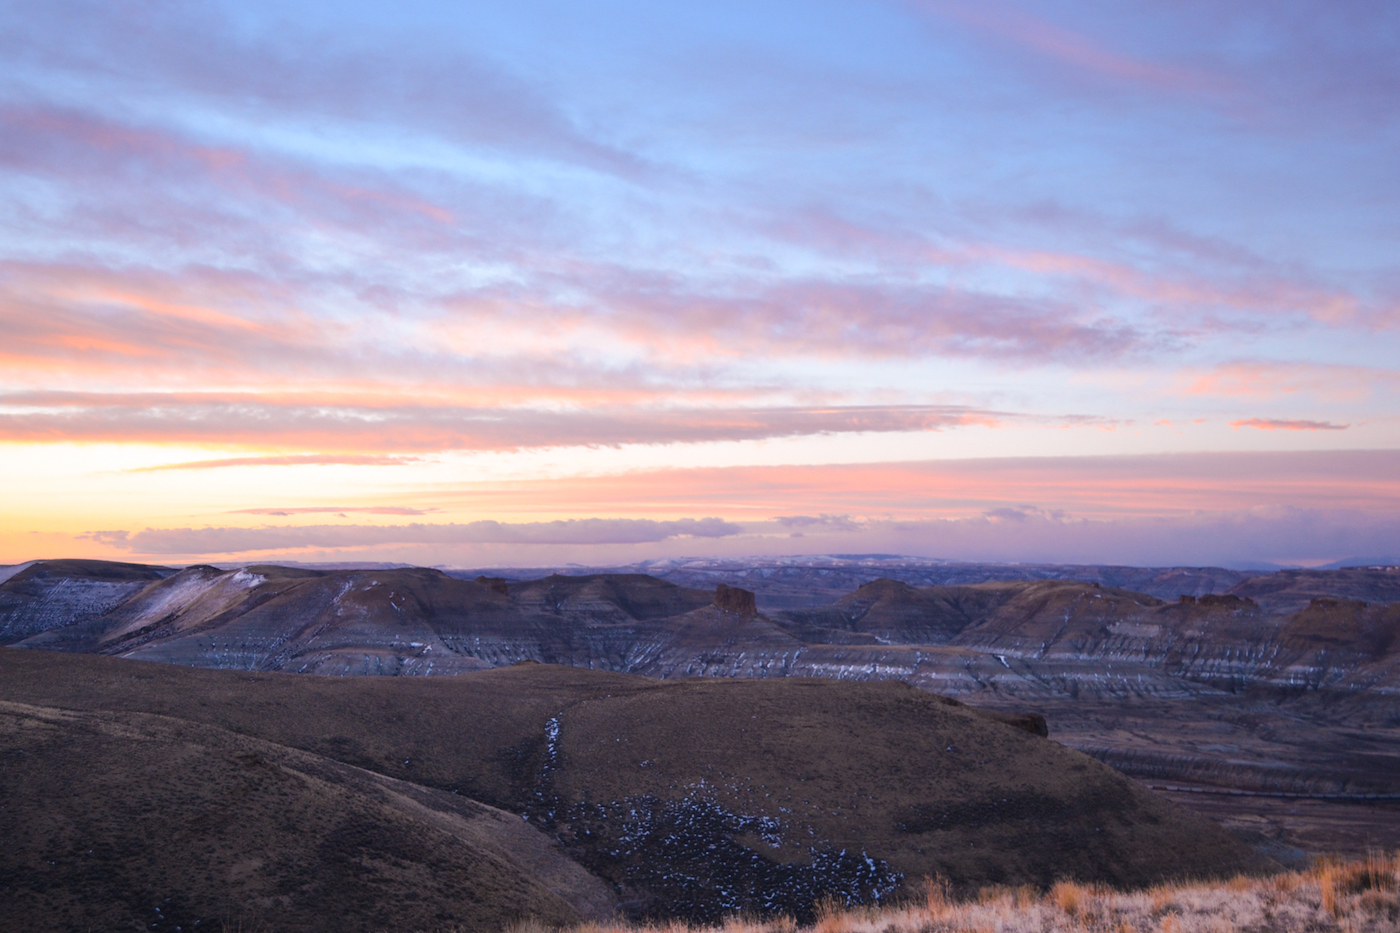 A colorful Wyoming sunset over the mountains near Green River.